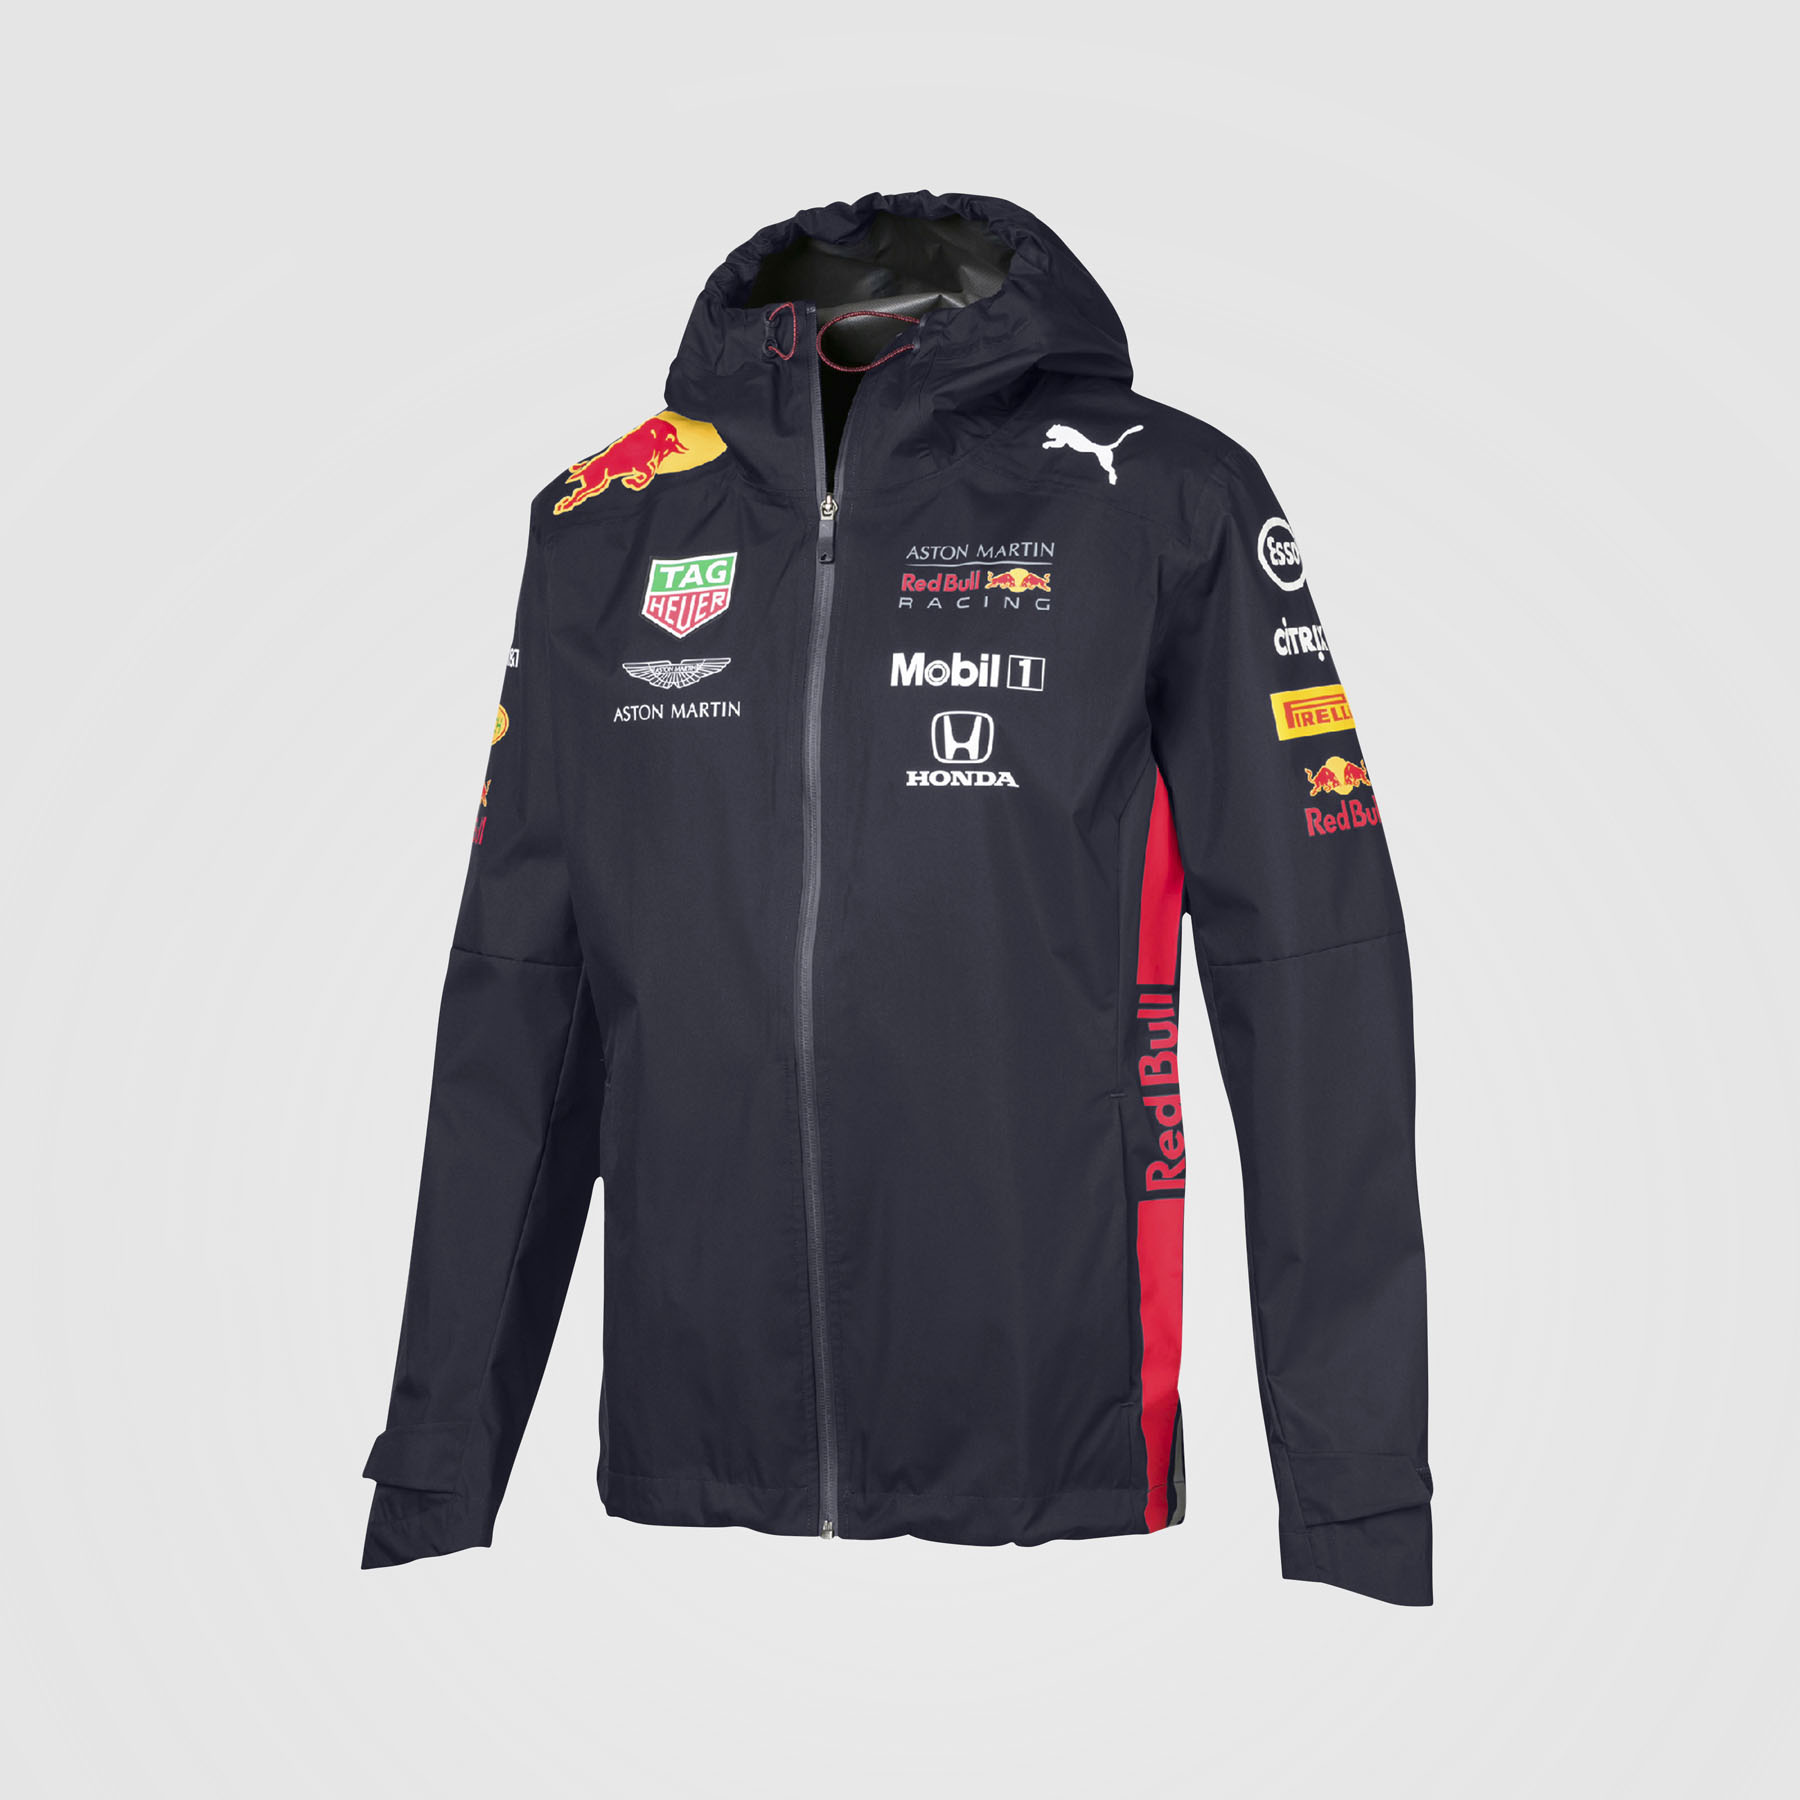 2019 Team Jacket - Red Bull Racing | Fans